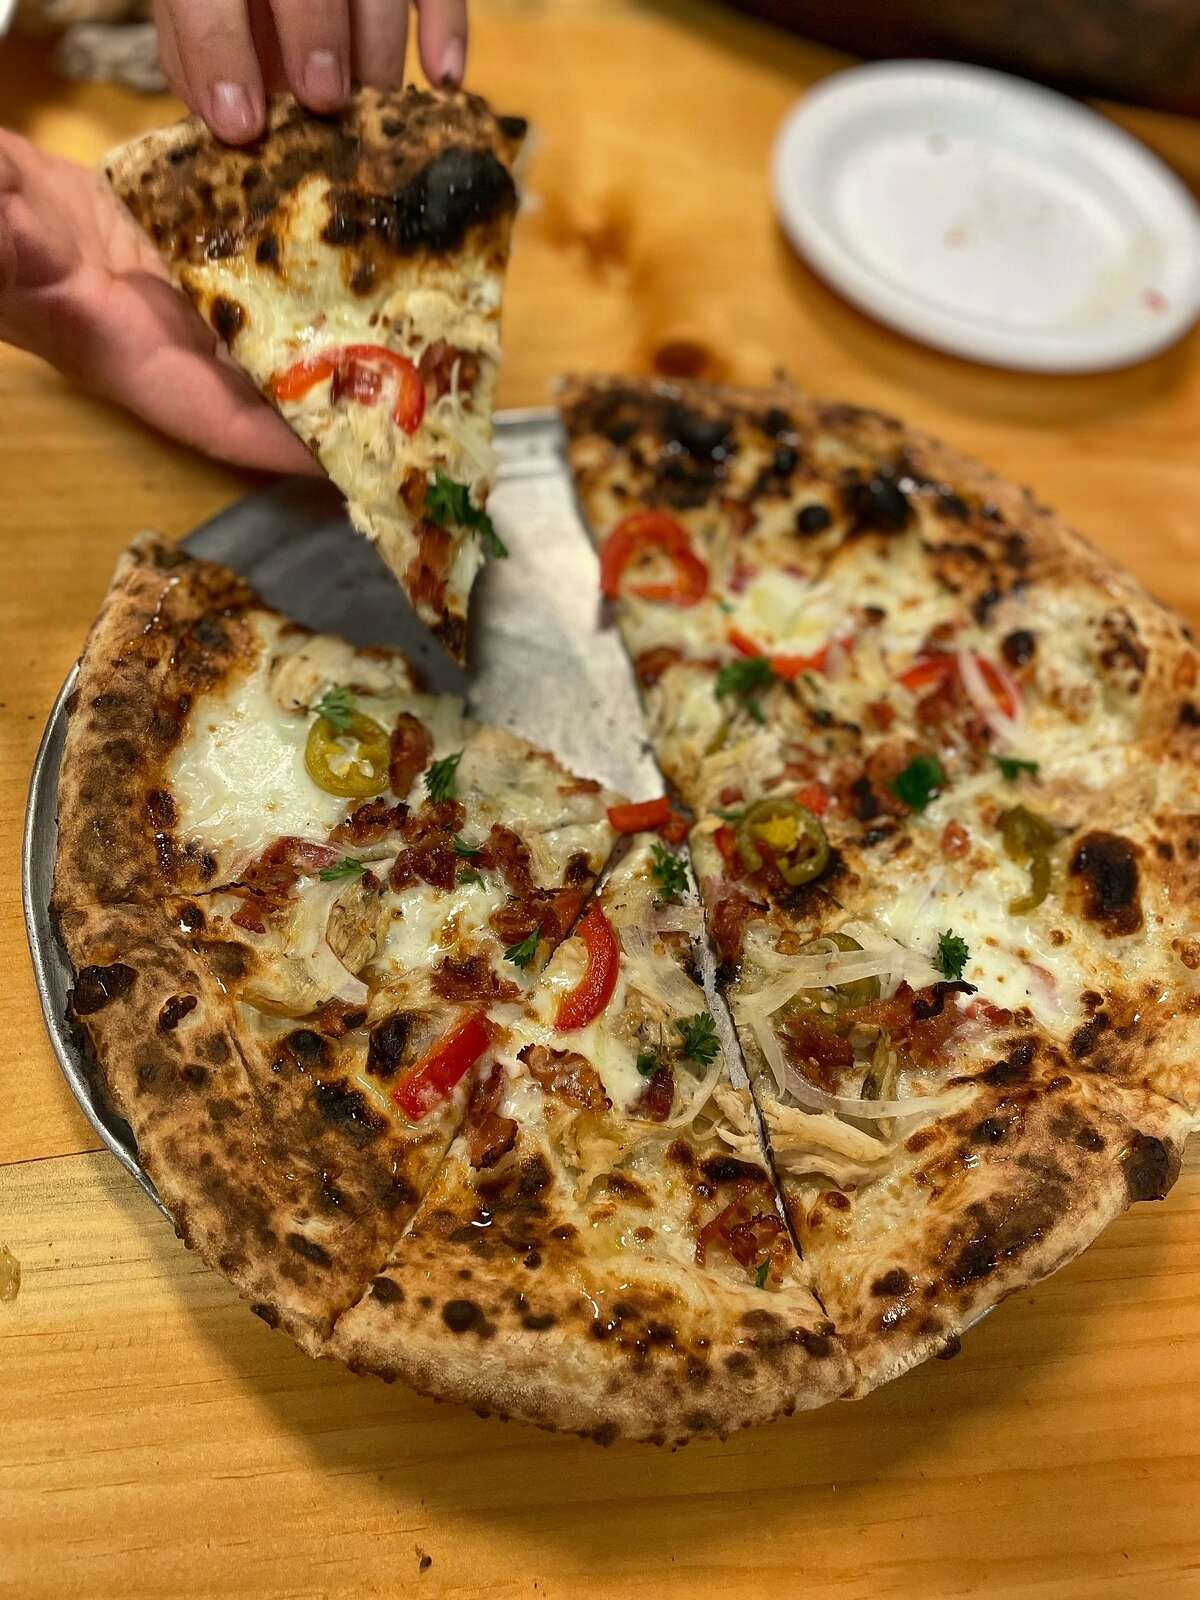 Wicked Brick Kitchen is serving up artisanal thin-crust pizza and Mexican-inspired "birriadillas" at Bristol's Better Half Brewing.